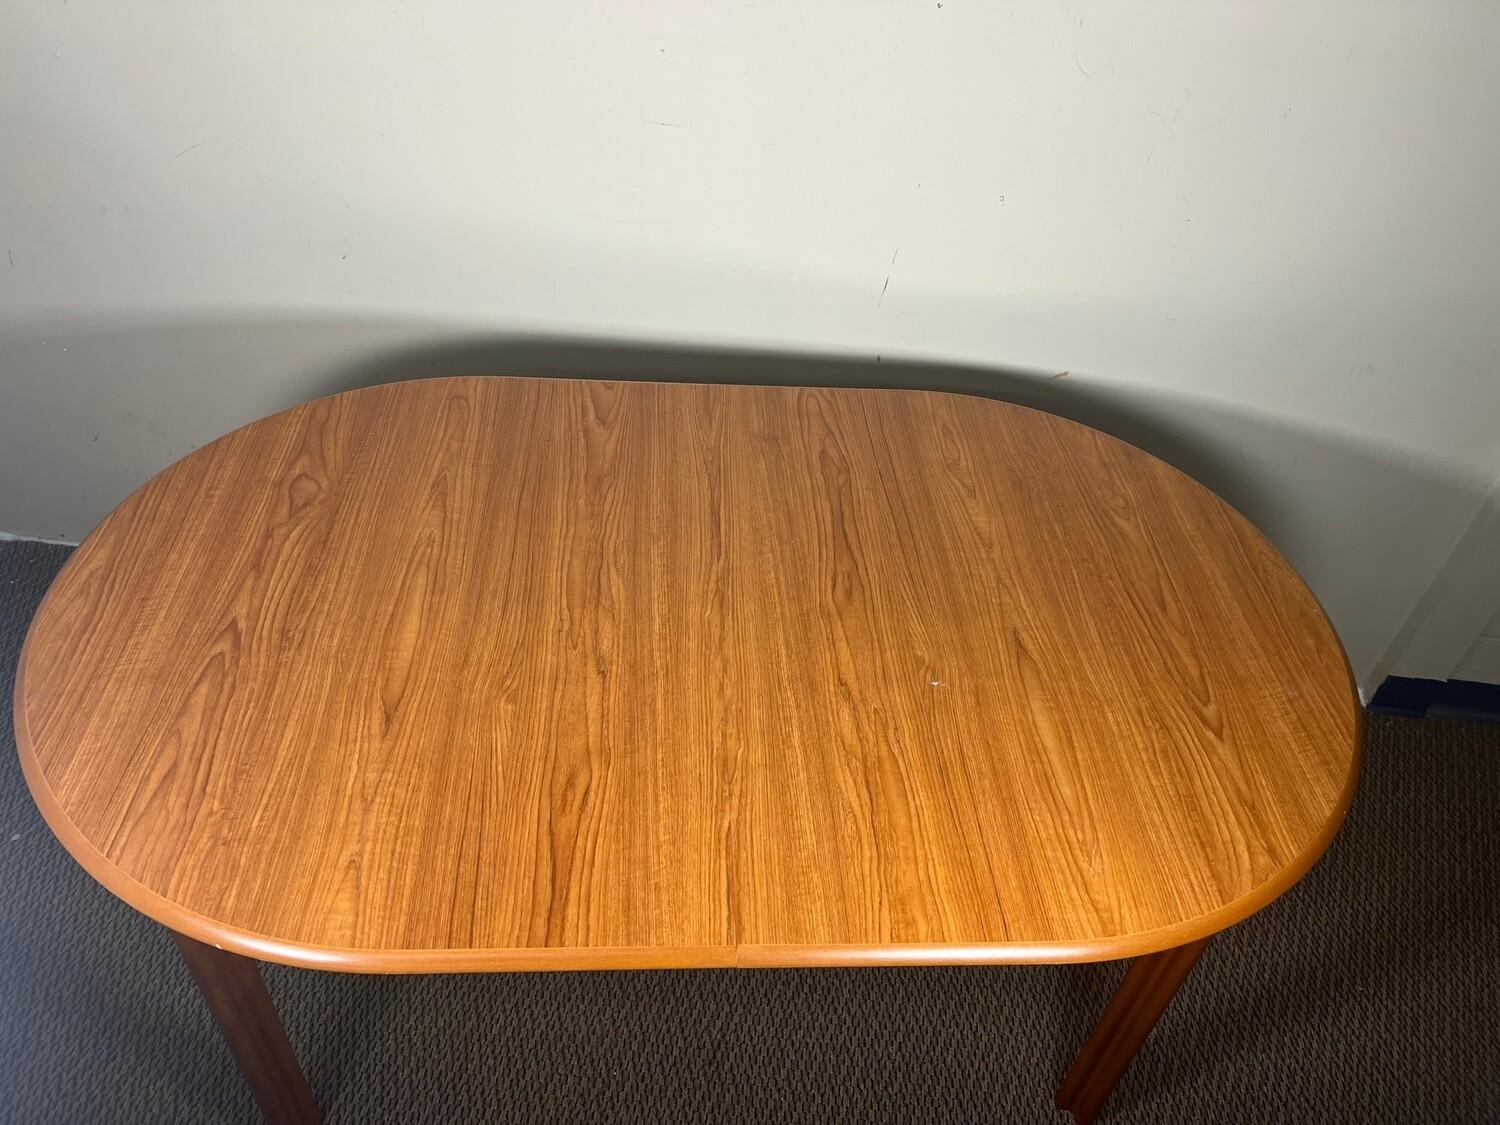 This is an oval  teak dining table with pop up leaf. Seats 6 - 8 people comfortably. The leaf is stored inside the table when not in use and can easily be opened up to incrrease the length of the table to 76